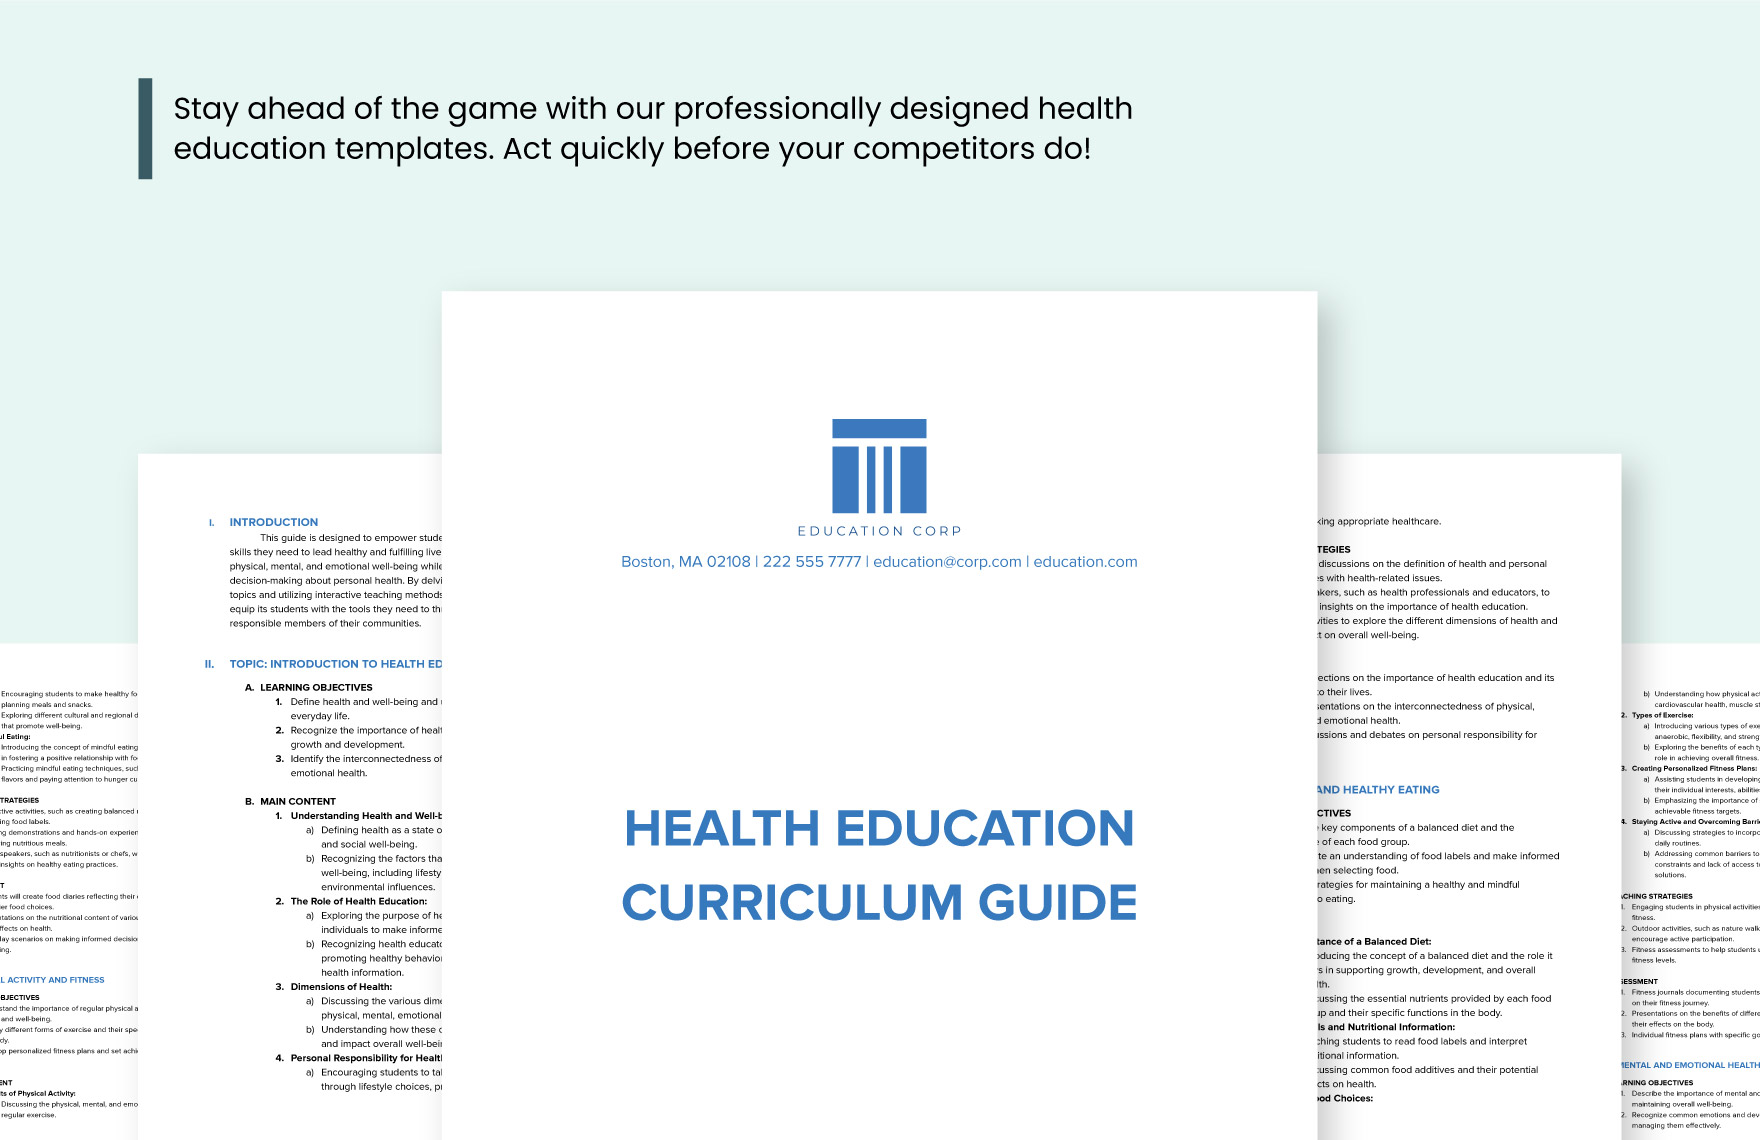 Health Education Curriculum Guide Template